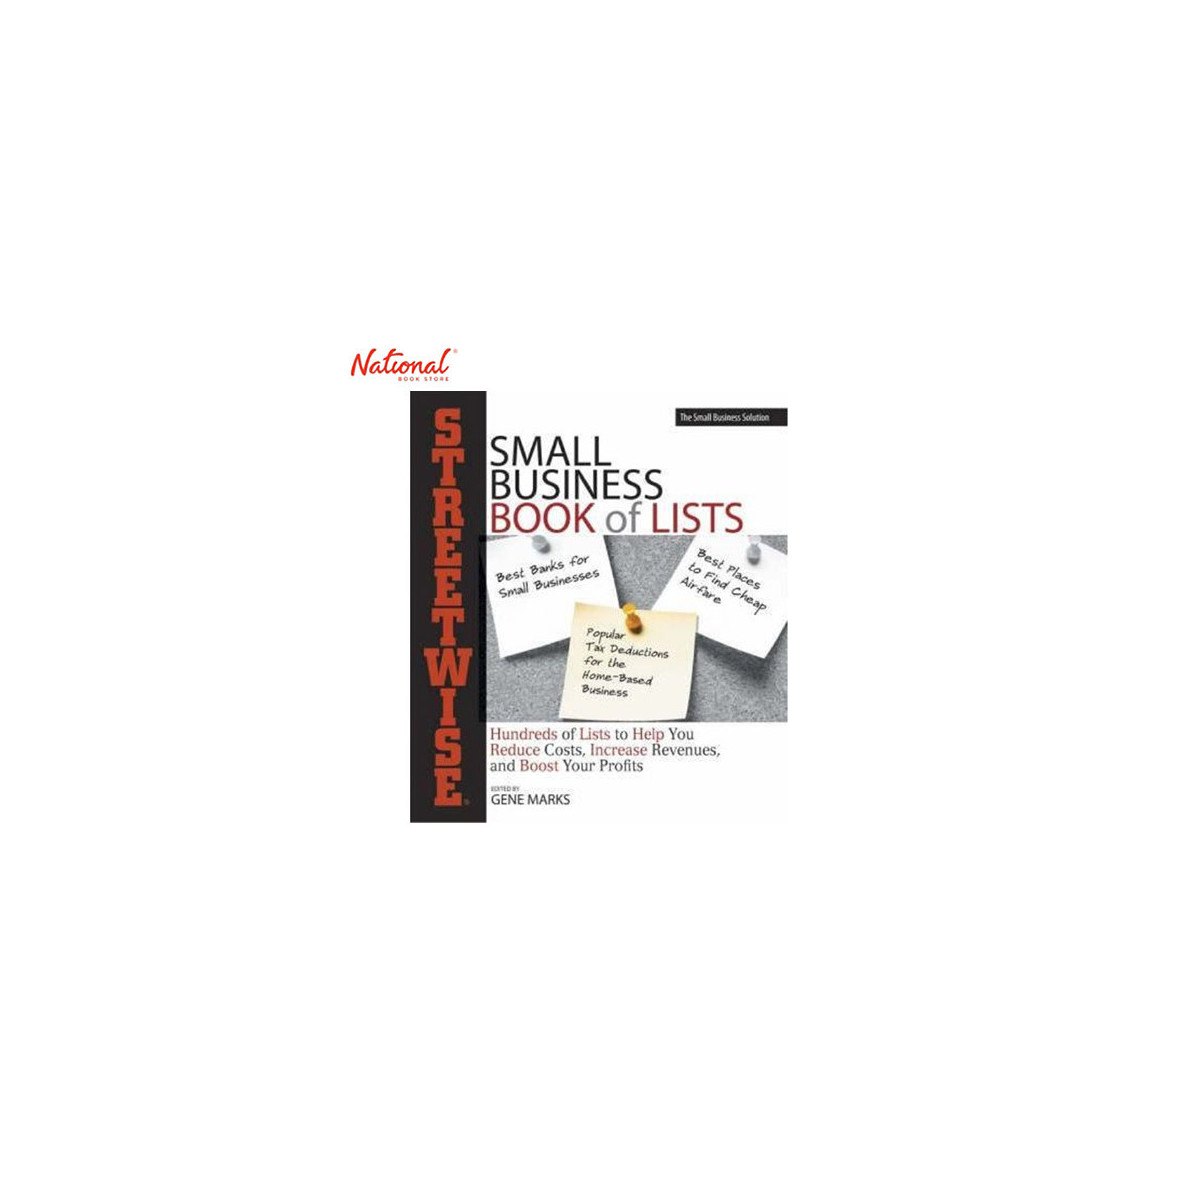 BOOK FEST SPECIAL: STREETWISE SMALL BUSINESS BOOK TRADEPAPER